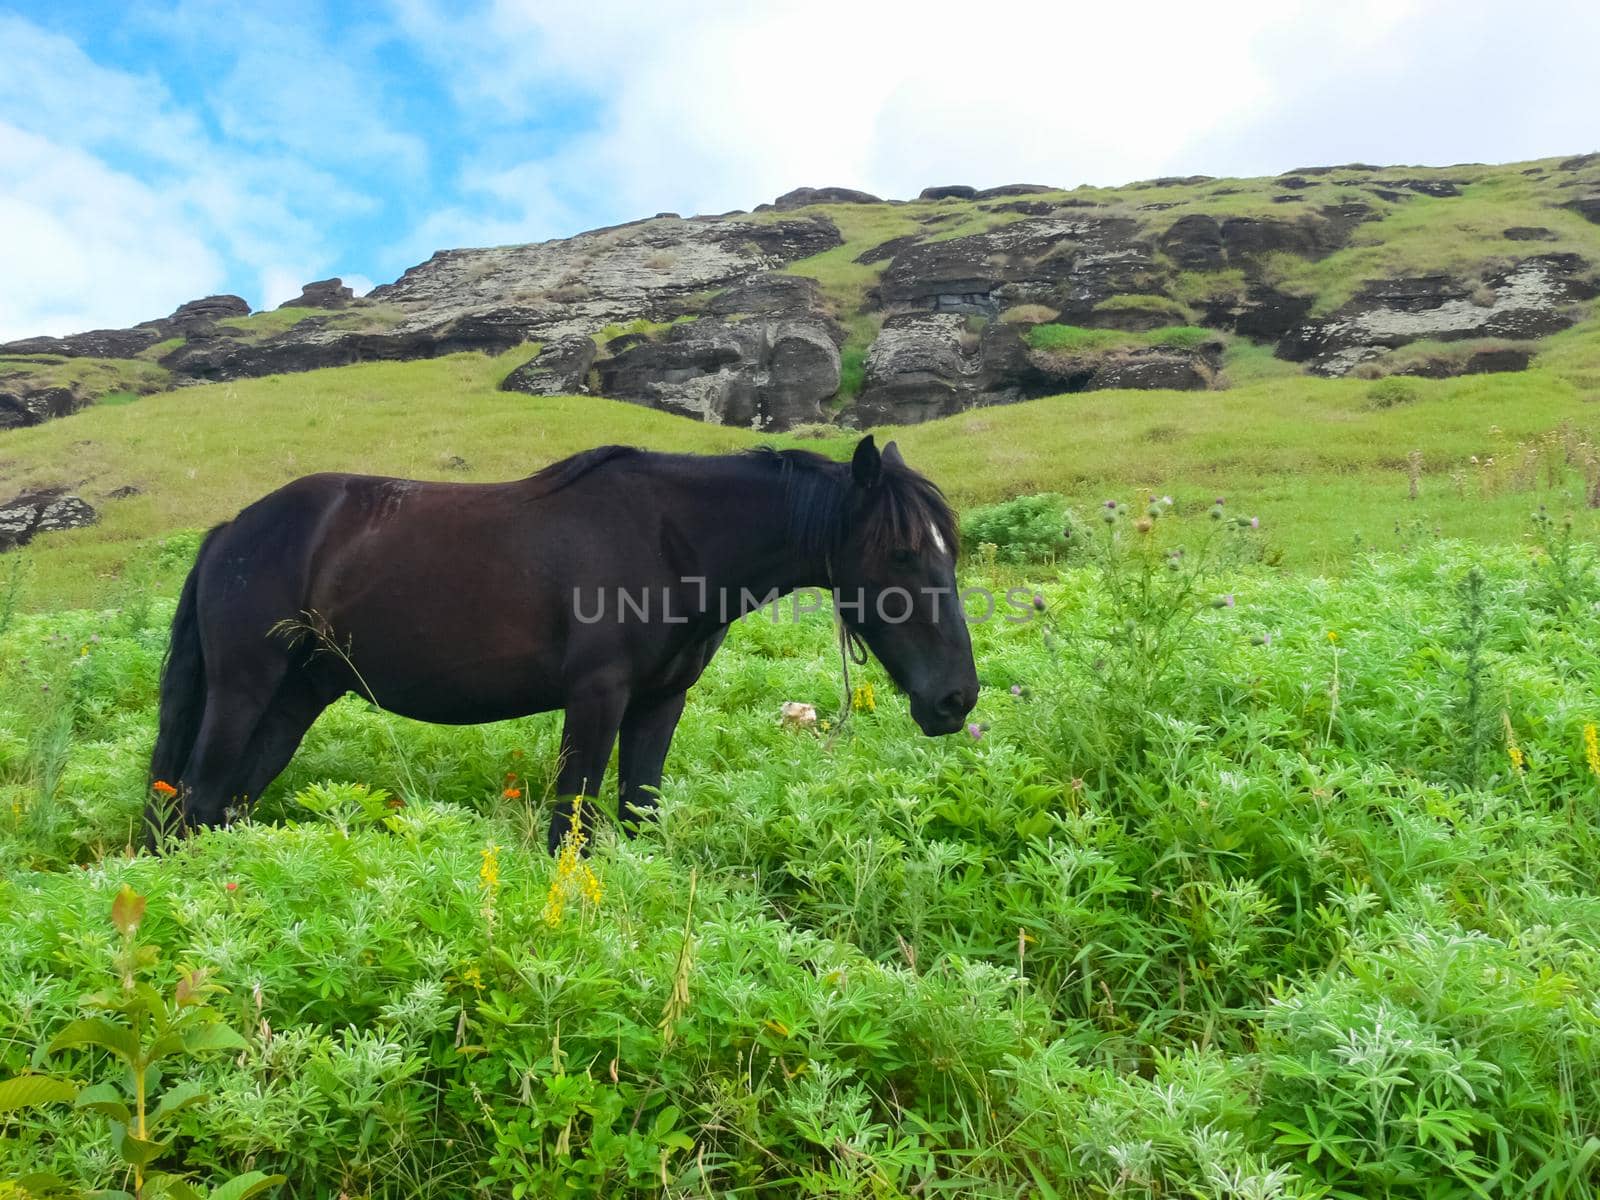 Grazing horses on Easter Island. Horses are imported species for Easter Island. by DePo